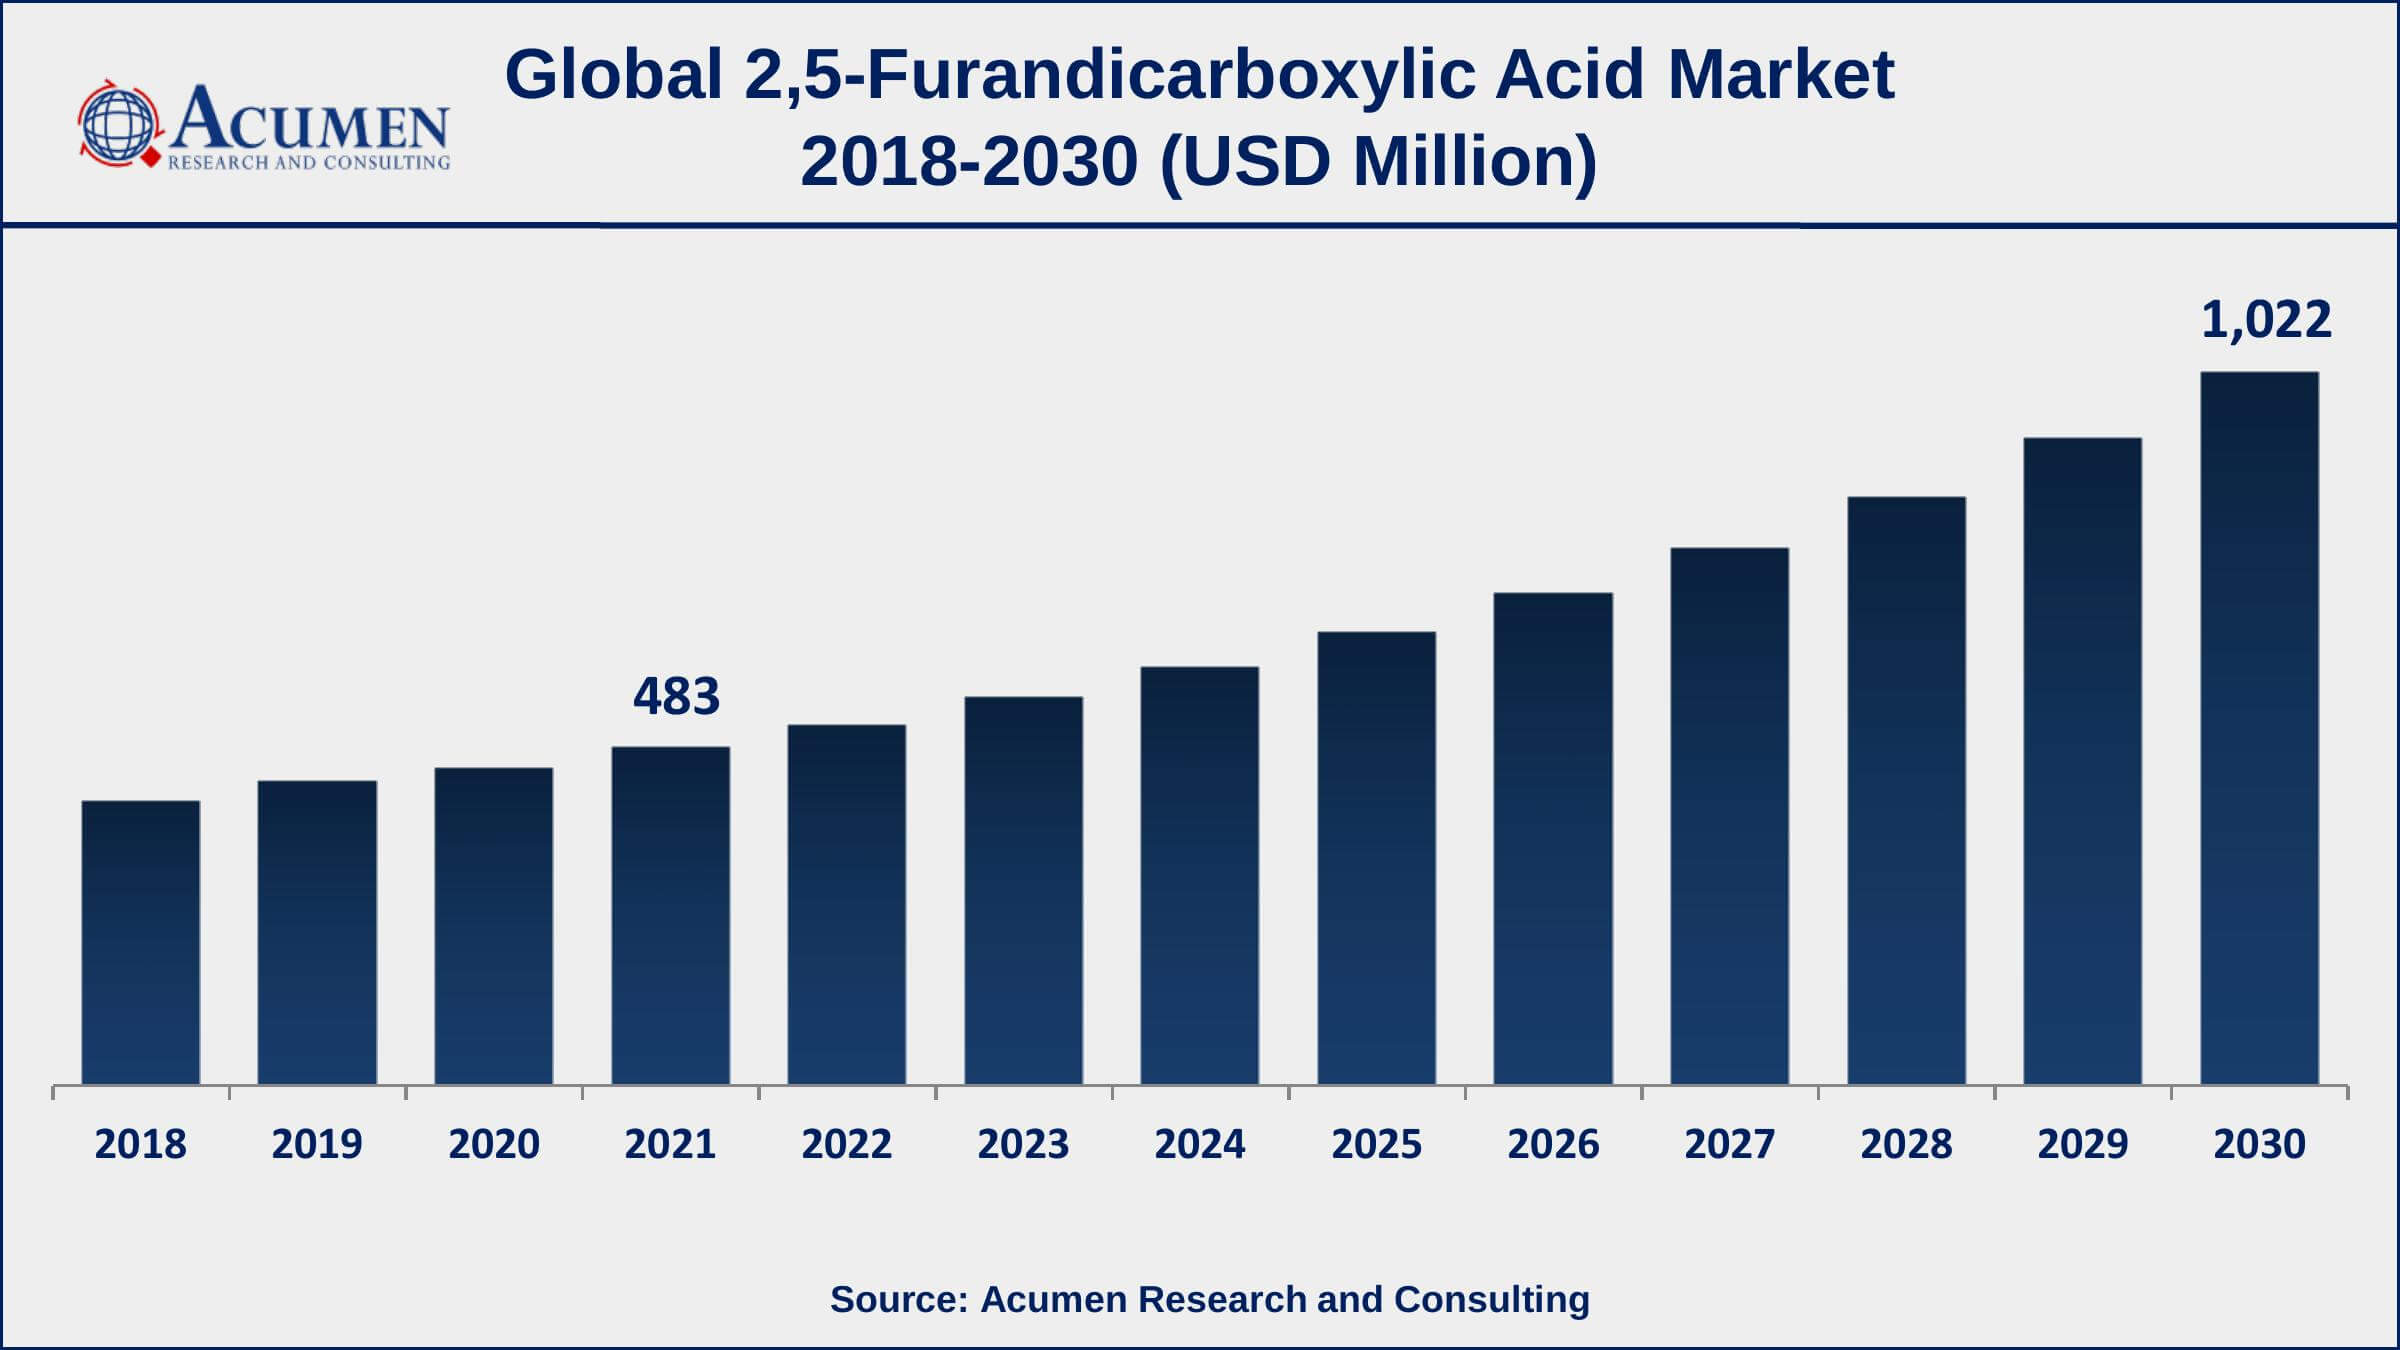 Asia-Pacific 2,5-furandicarboxylic acid market growth will observe strongest CAGR from 2022 to 2030